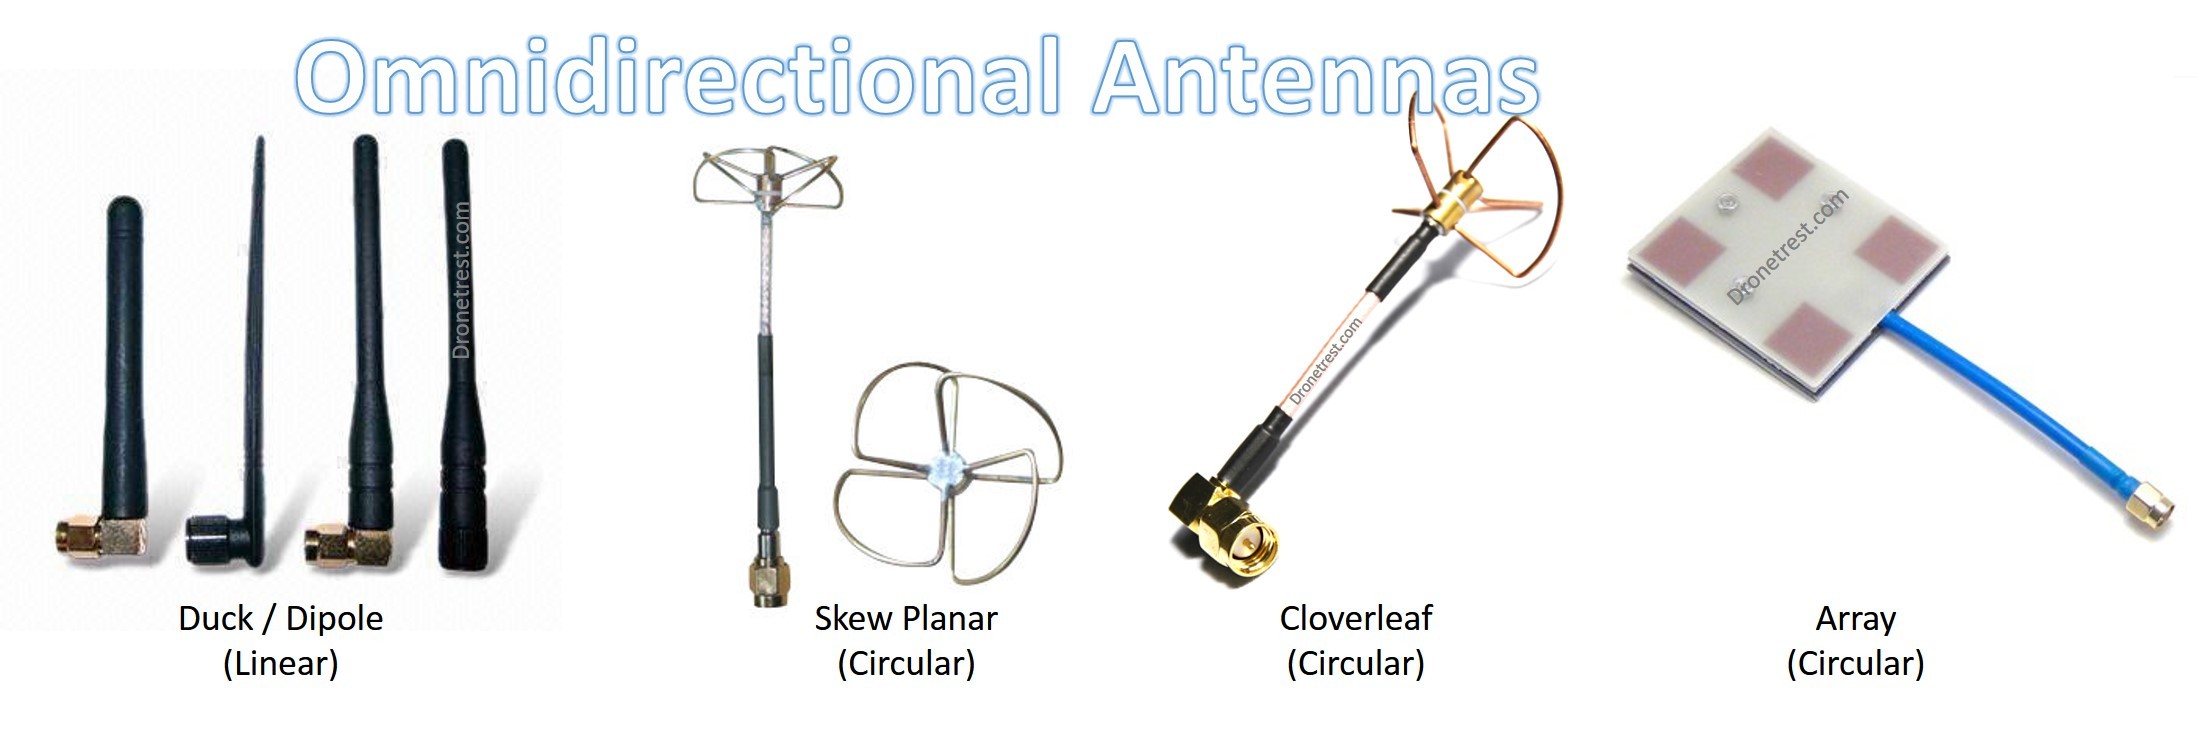 The complete guide to FPV antennas for your drone - Guides ...